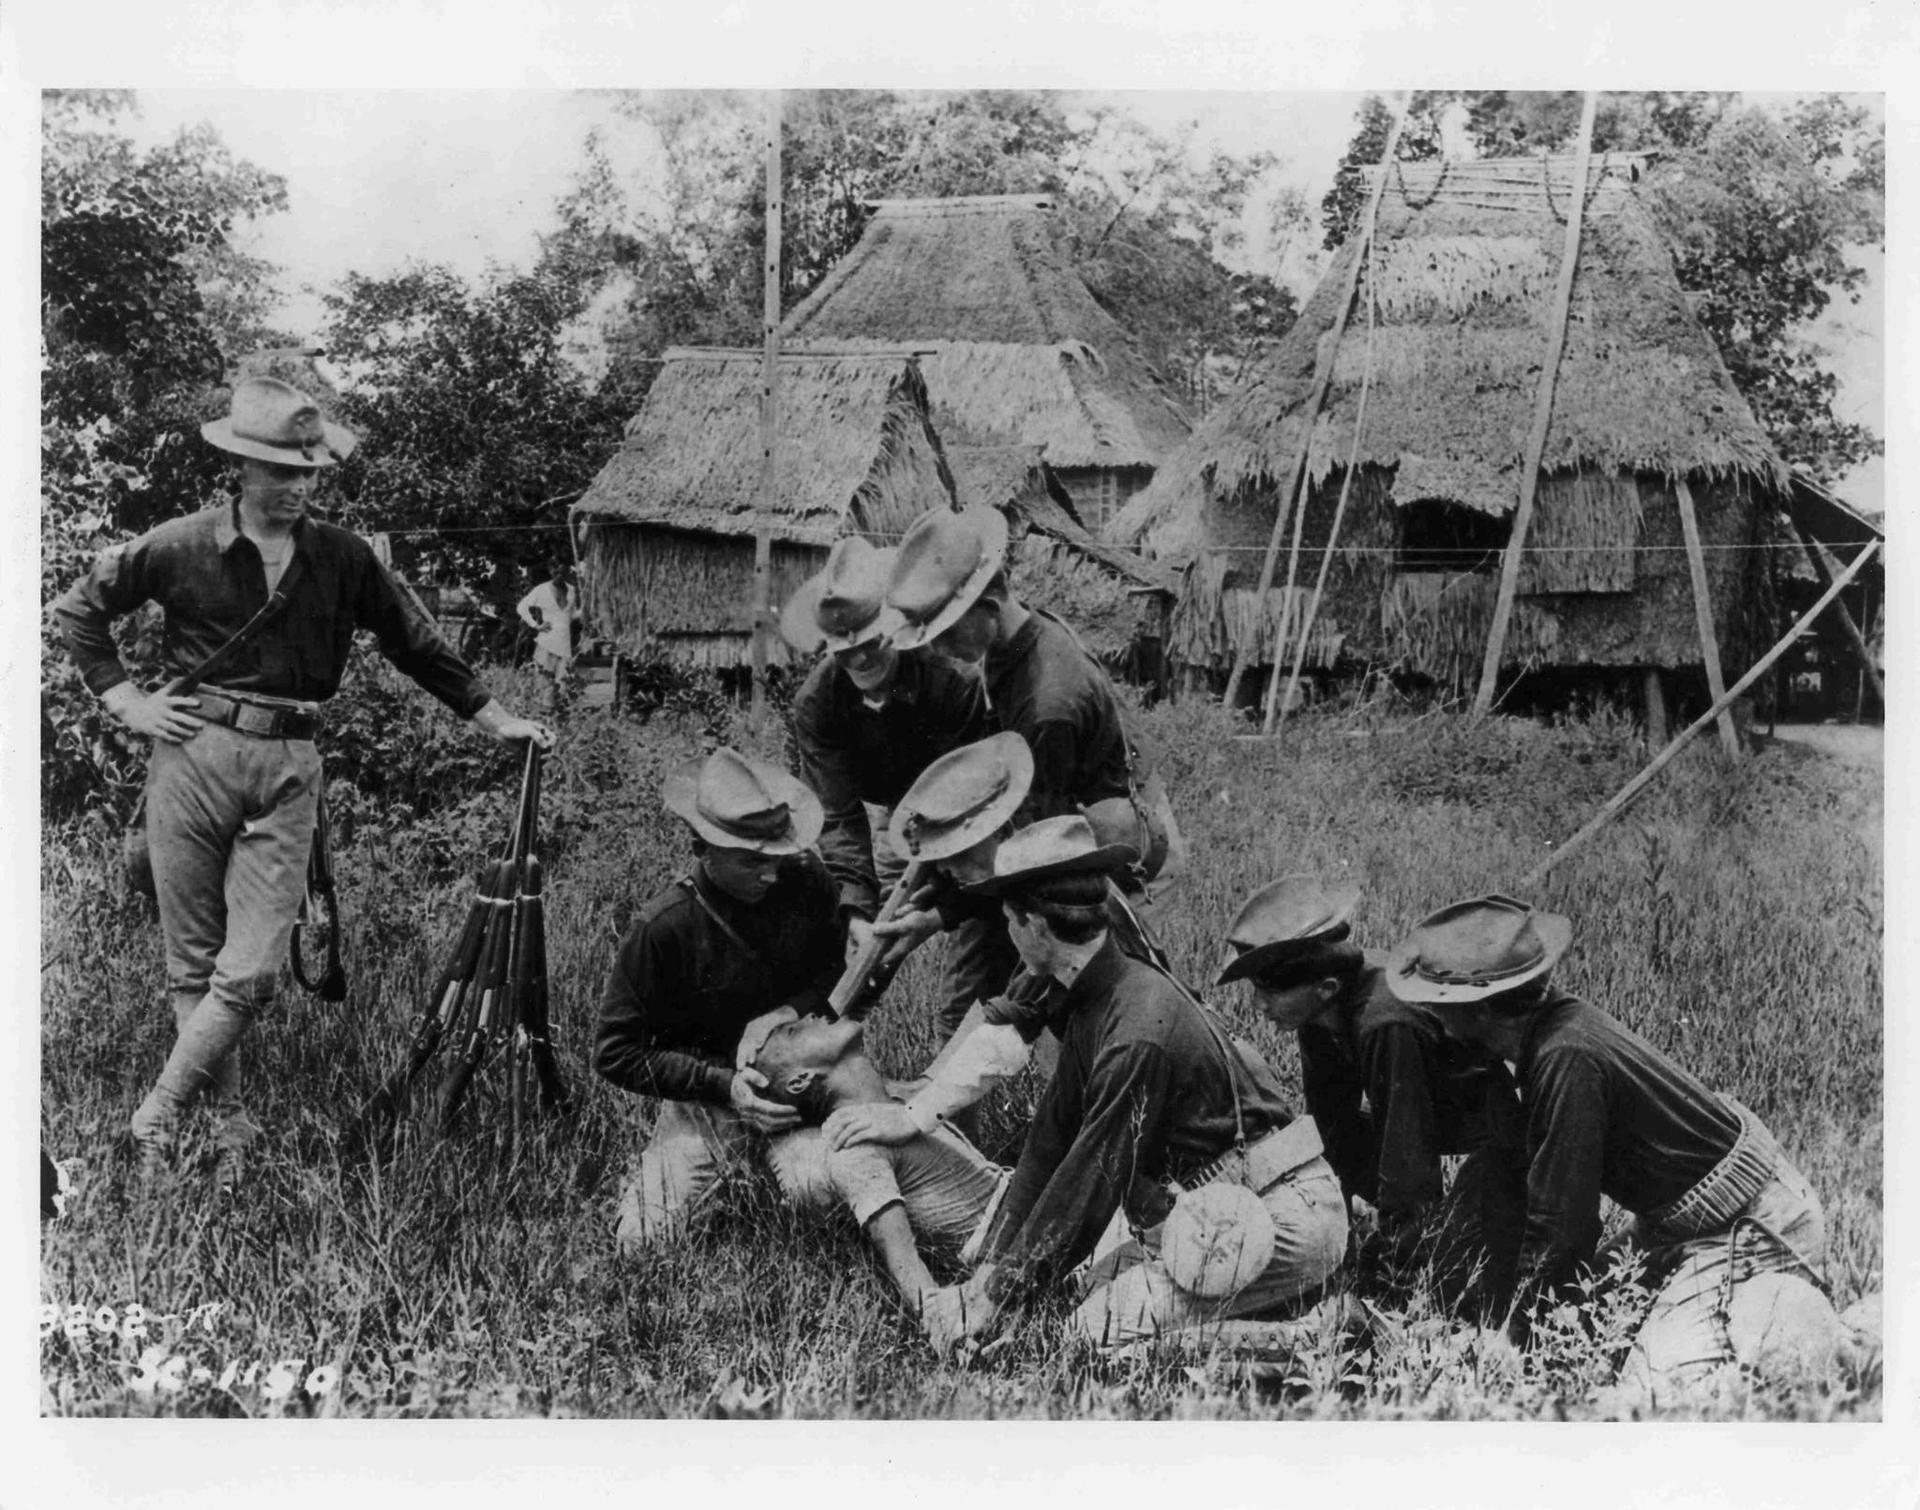 Soldiers from the 35th US Volunteer Infantry subject a Filipino to the ‘water cure,’ a common ‘enhanced interrogation’ technique employed during the war to pacify the Philippines between 1899 and 1902. 